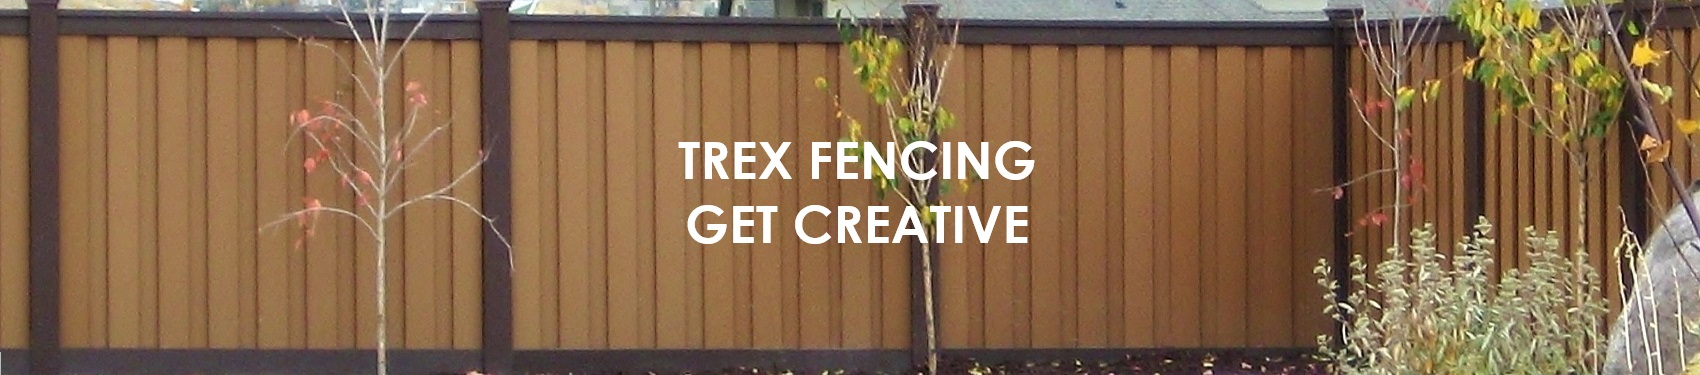 Creative Uses of Trex Wood Alternative Fencing